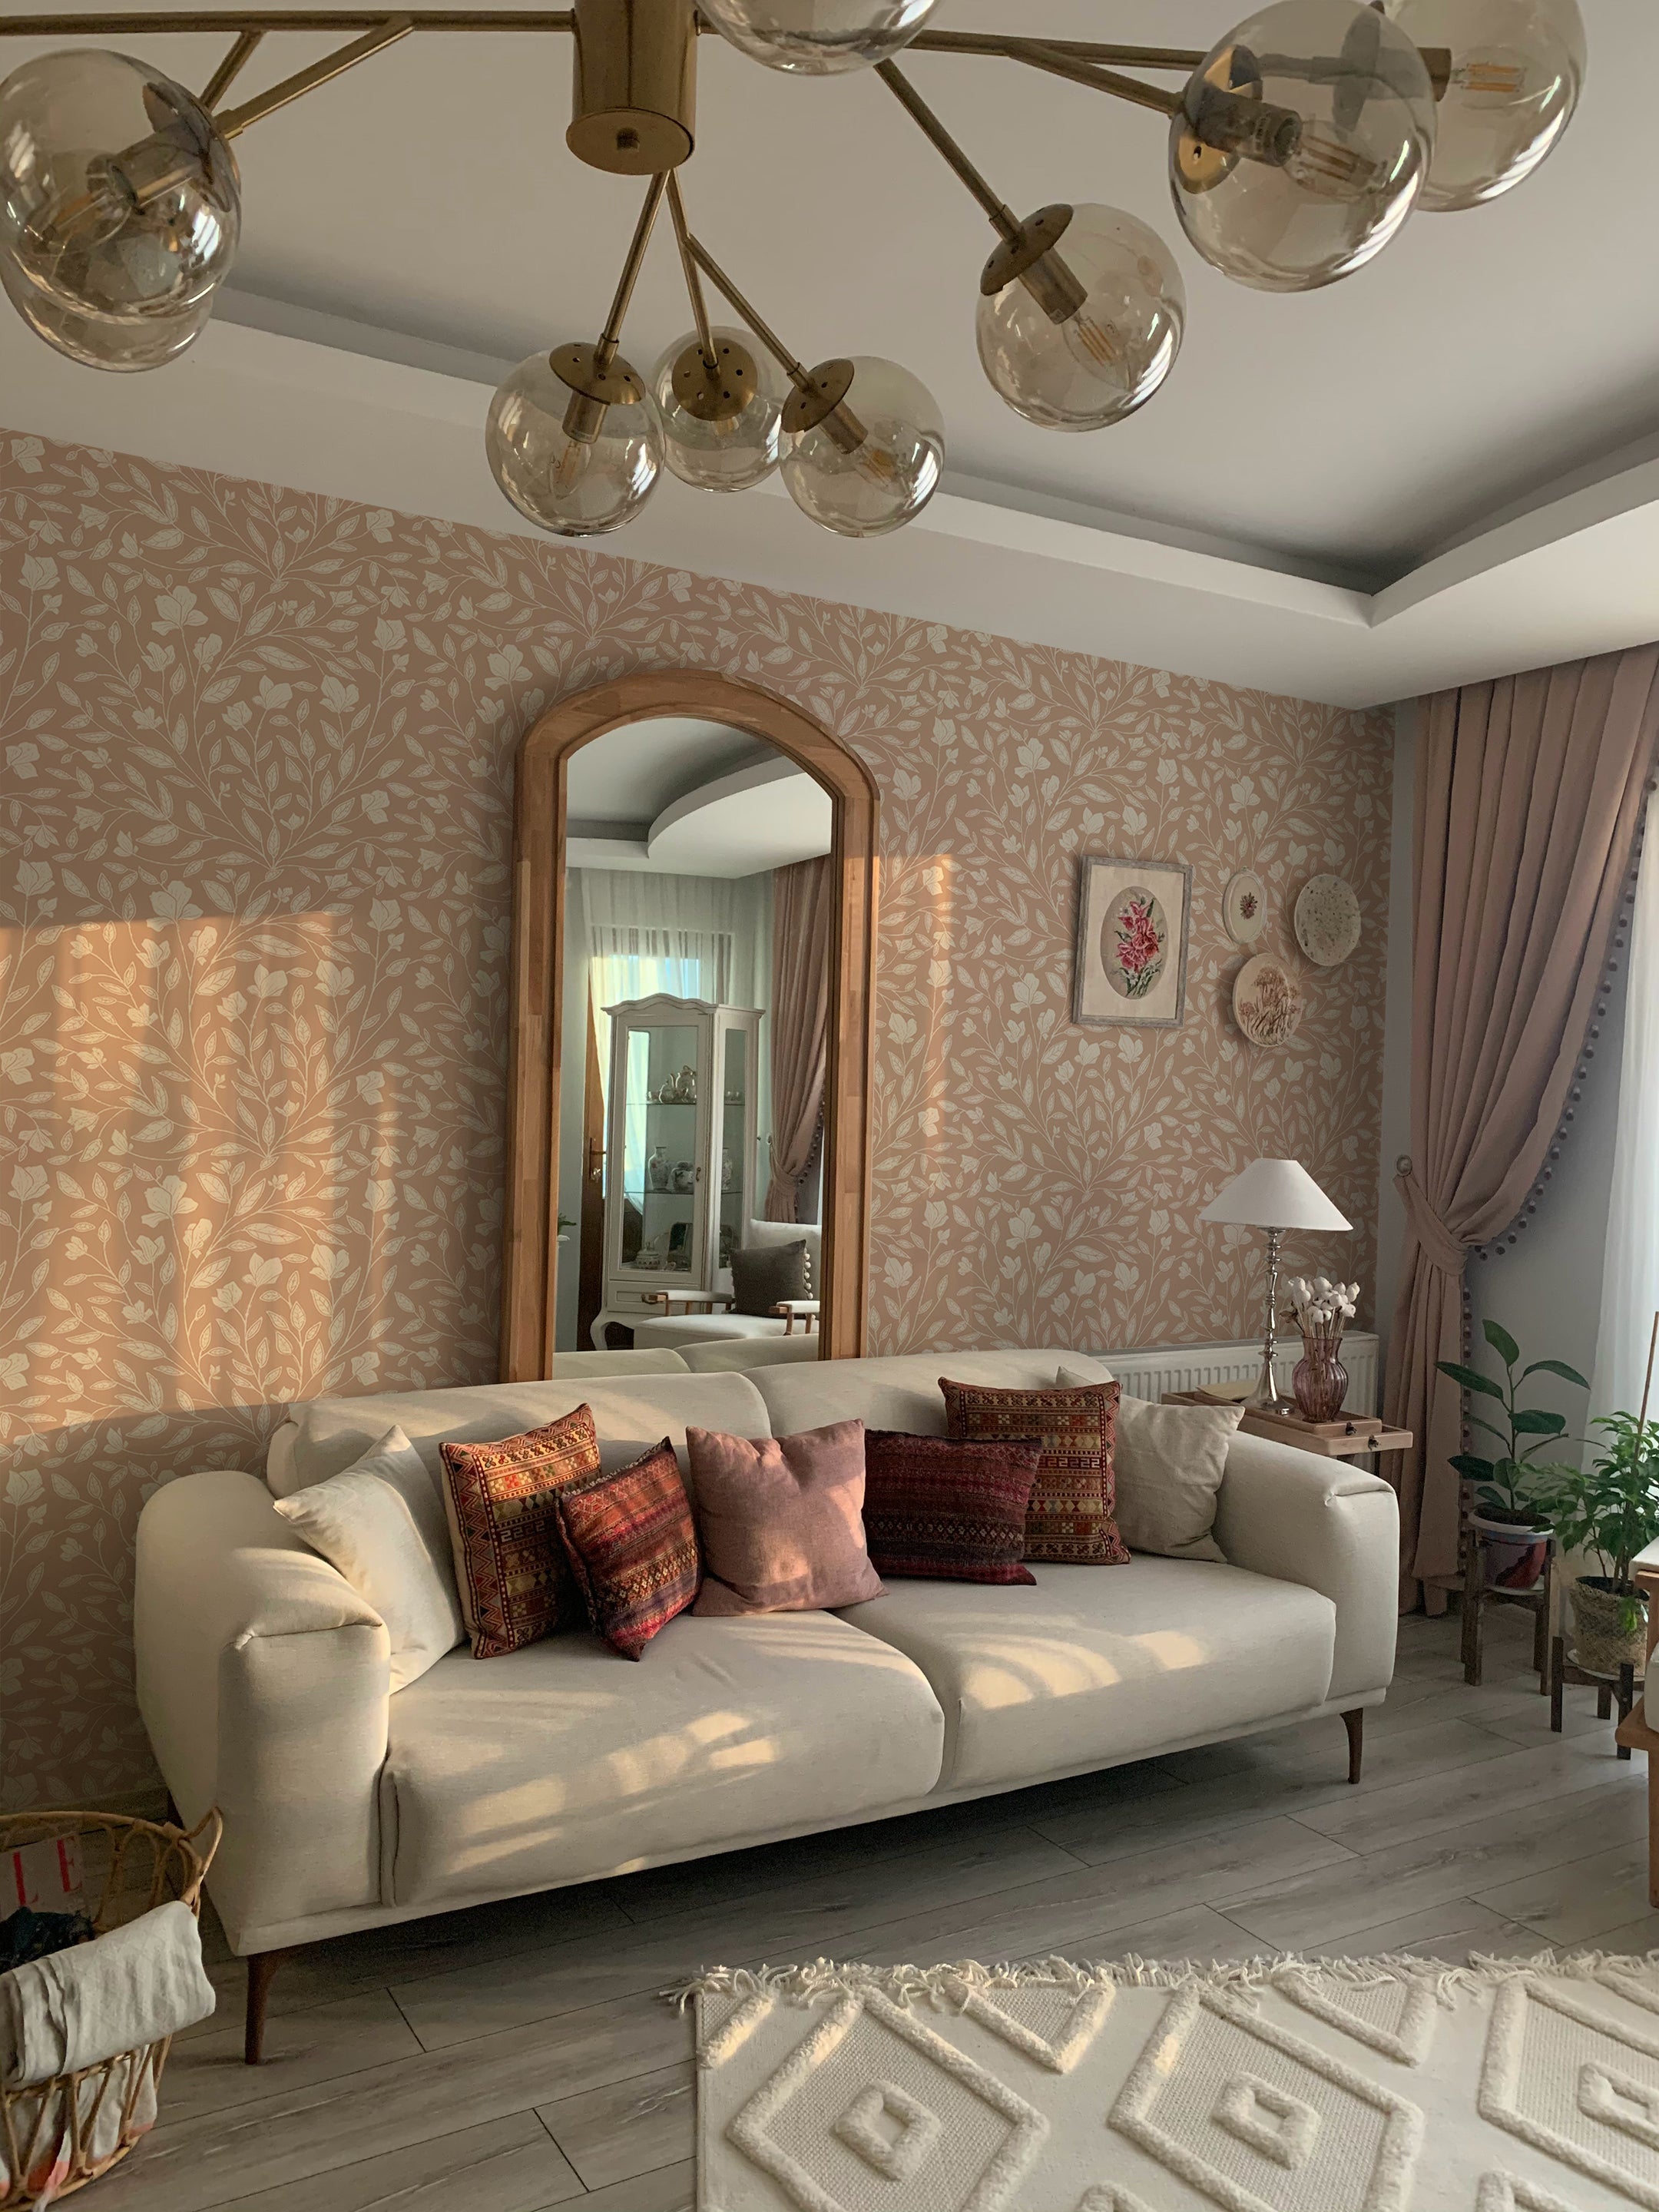 An elegantly furnished living room featuring a taupe sofa with vibrant patterned cushions, illuminated by a modern chandelier, against a backdrop of taupe floral vine wallpaper. The room is accented with a large arched mirror and decorative plates, creating a cozy and stylish atmosphere.